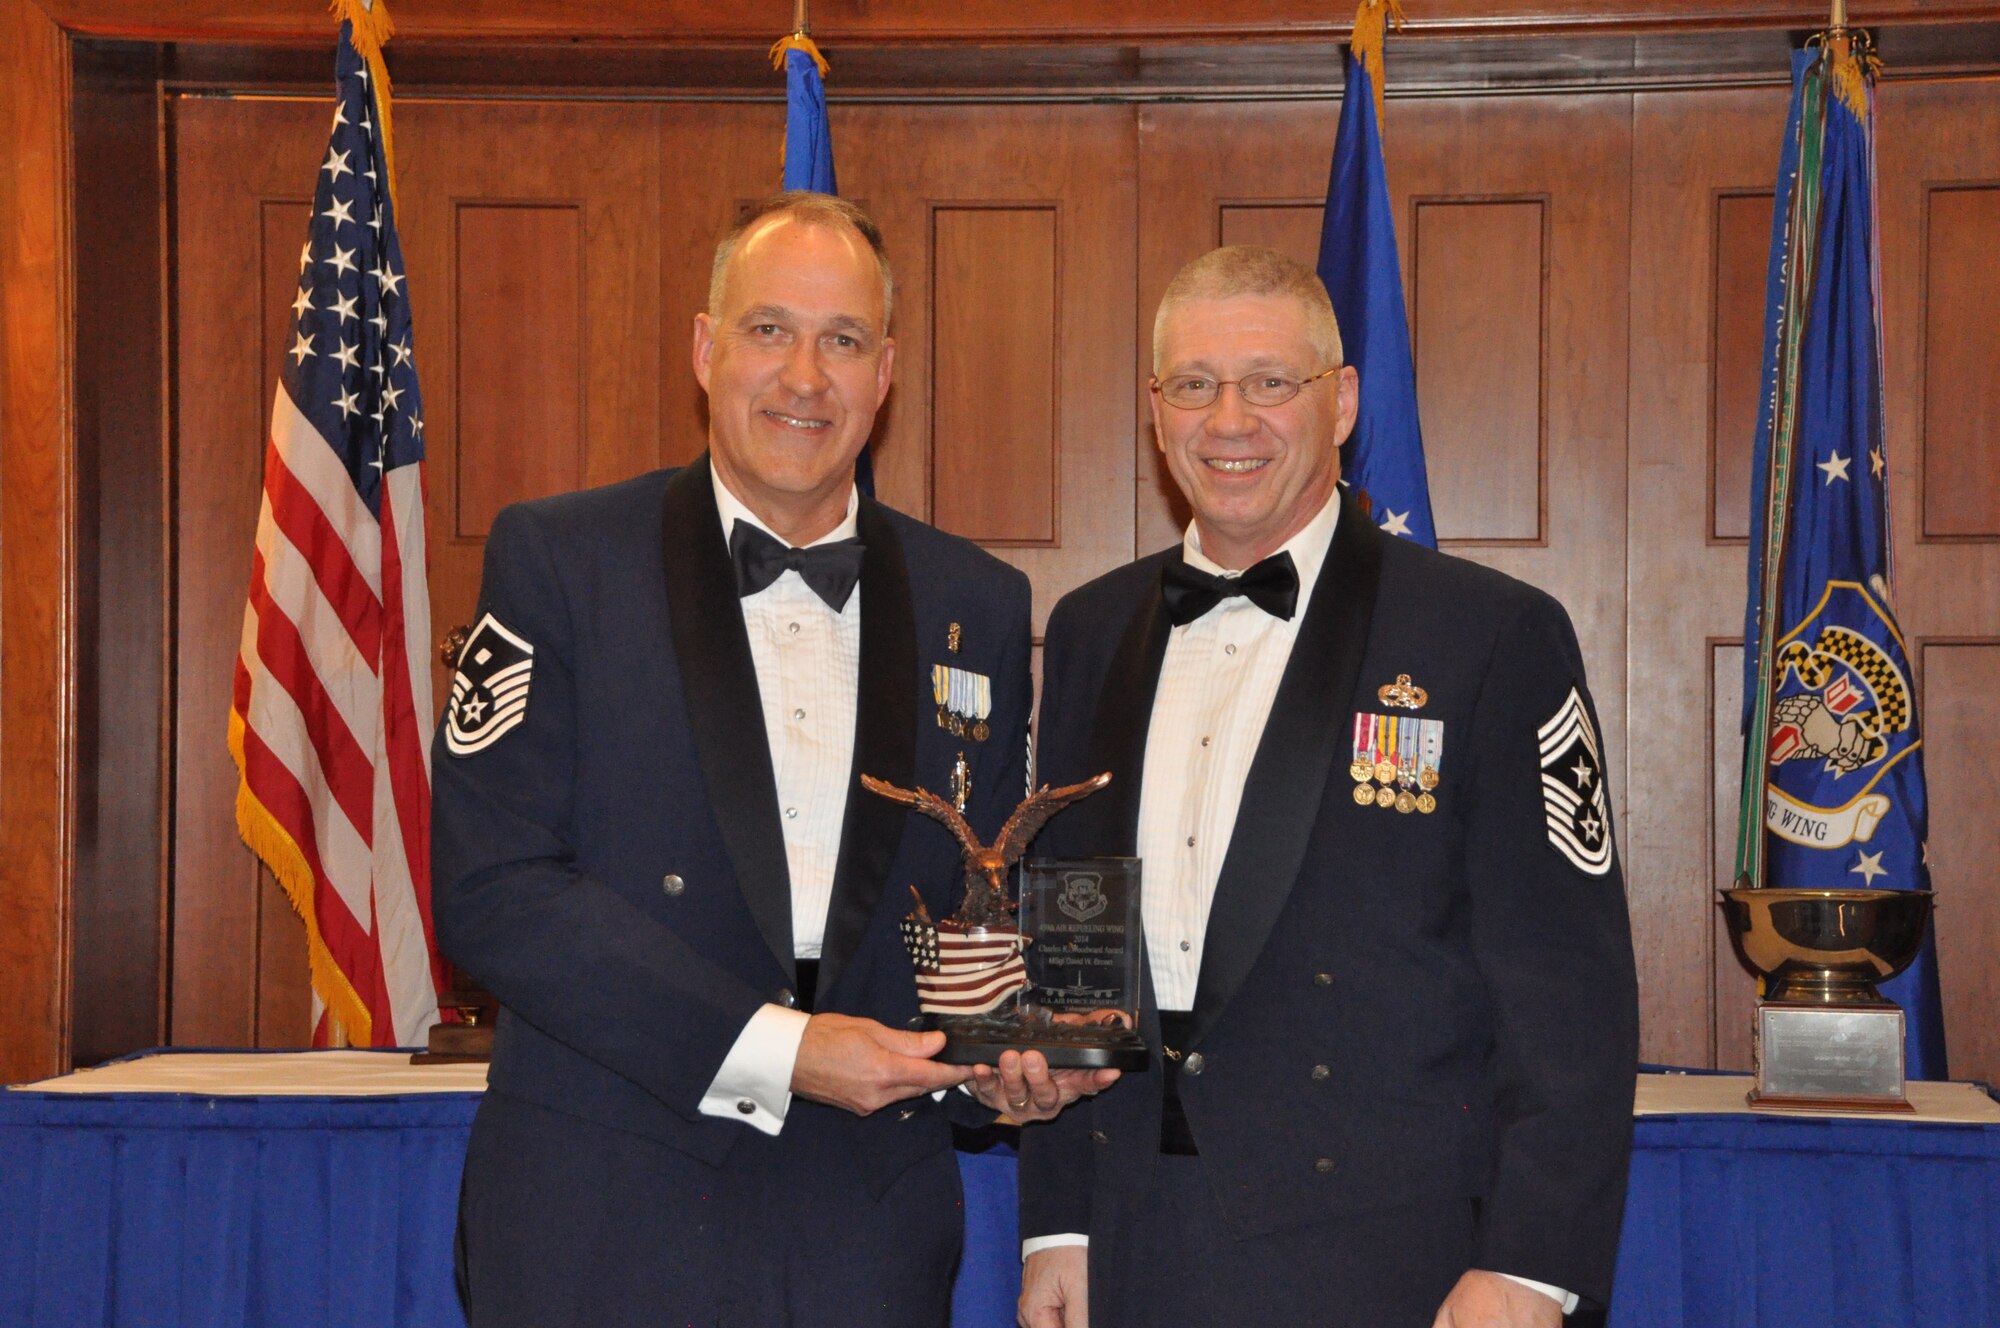 Master Sgt. David Brown, 459th Aerospace Medicine Squadron, wins the Charles R. Woodward First Sergeant Award for Excellence at the 459 ARW Annual Awards Banquet on Saturday, March 7, 2015. He was presented the award by the wing command chief, Chief Master Sgt. Tim Huffman. (Air Force Photo / SrA Kristin Kurtz)
